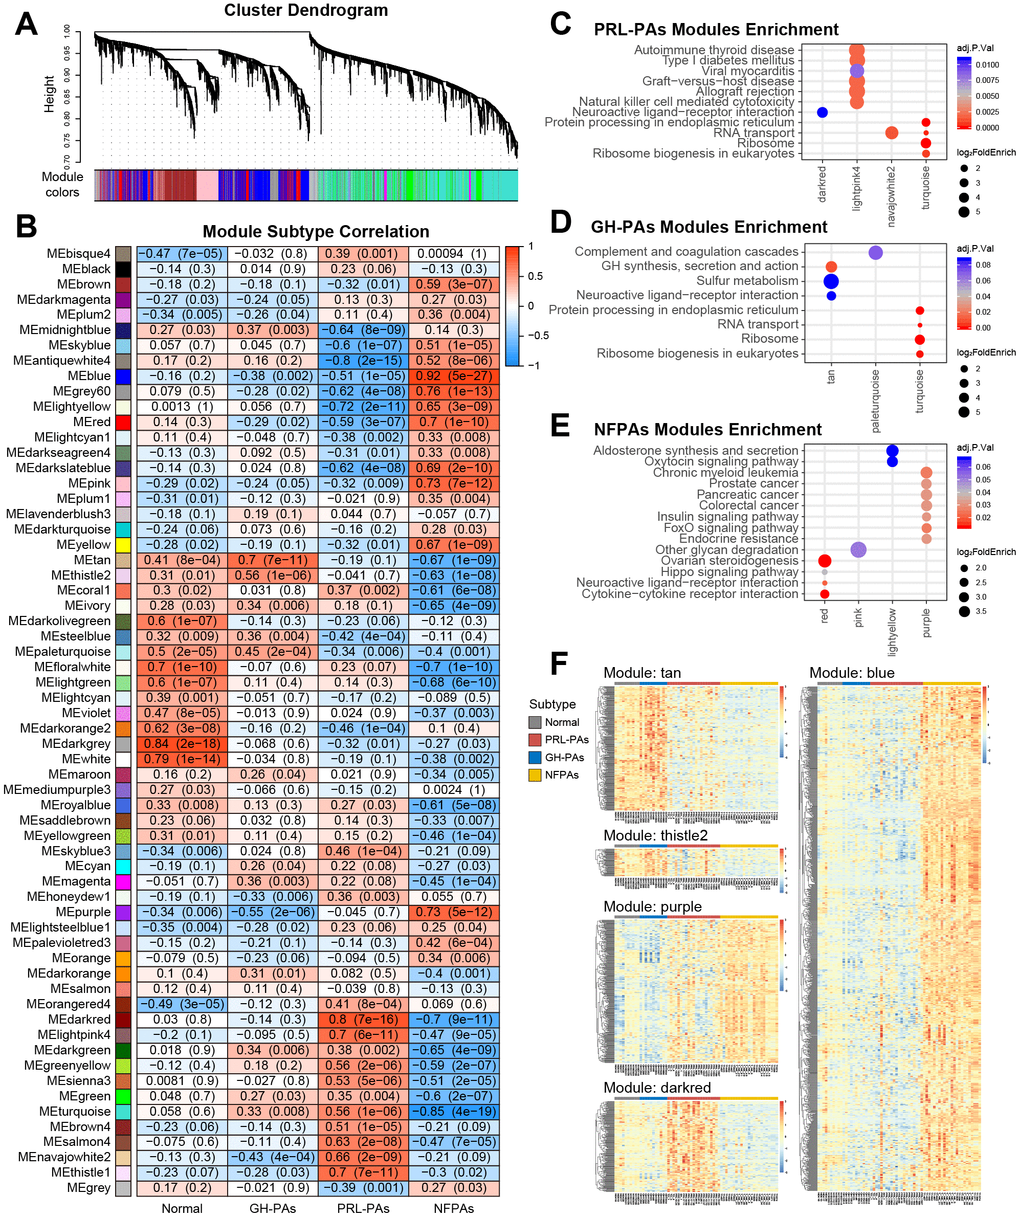 Weighted gene correlation network analysis (WGCNA) of transcriptome data reveals subtype specific coexpression modules. (A) WGCNA cluster dendrogram groups genes into distinct gene coexpression modules defined by dendrogram branch cutting. (B) Modules-subtype correlation heatmap of three PA subtypes and normal tissues. The cells in the heatmap were colored by the correlation between eigengene expression and each sample group, the correlation coefficients and P values were indicated in each cell. (C–E) KEGG pathway enrichment analysis of genes in the modules significantly associated with different PA subtypes. Adjusted P value F) Expression profiles of genes in key modules associated with PA subtypes.